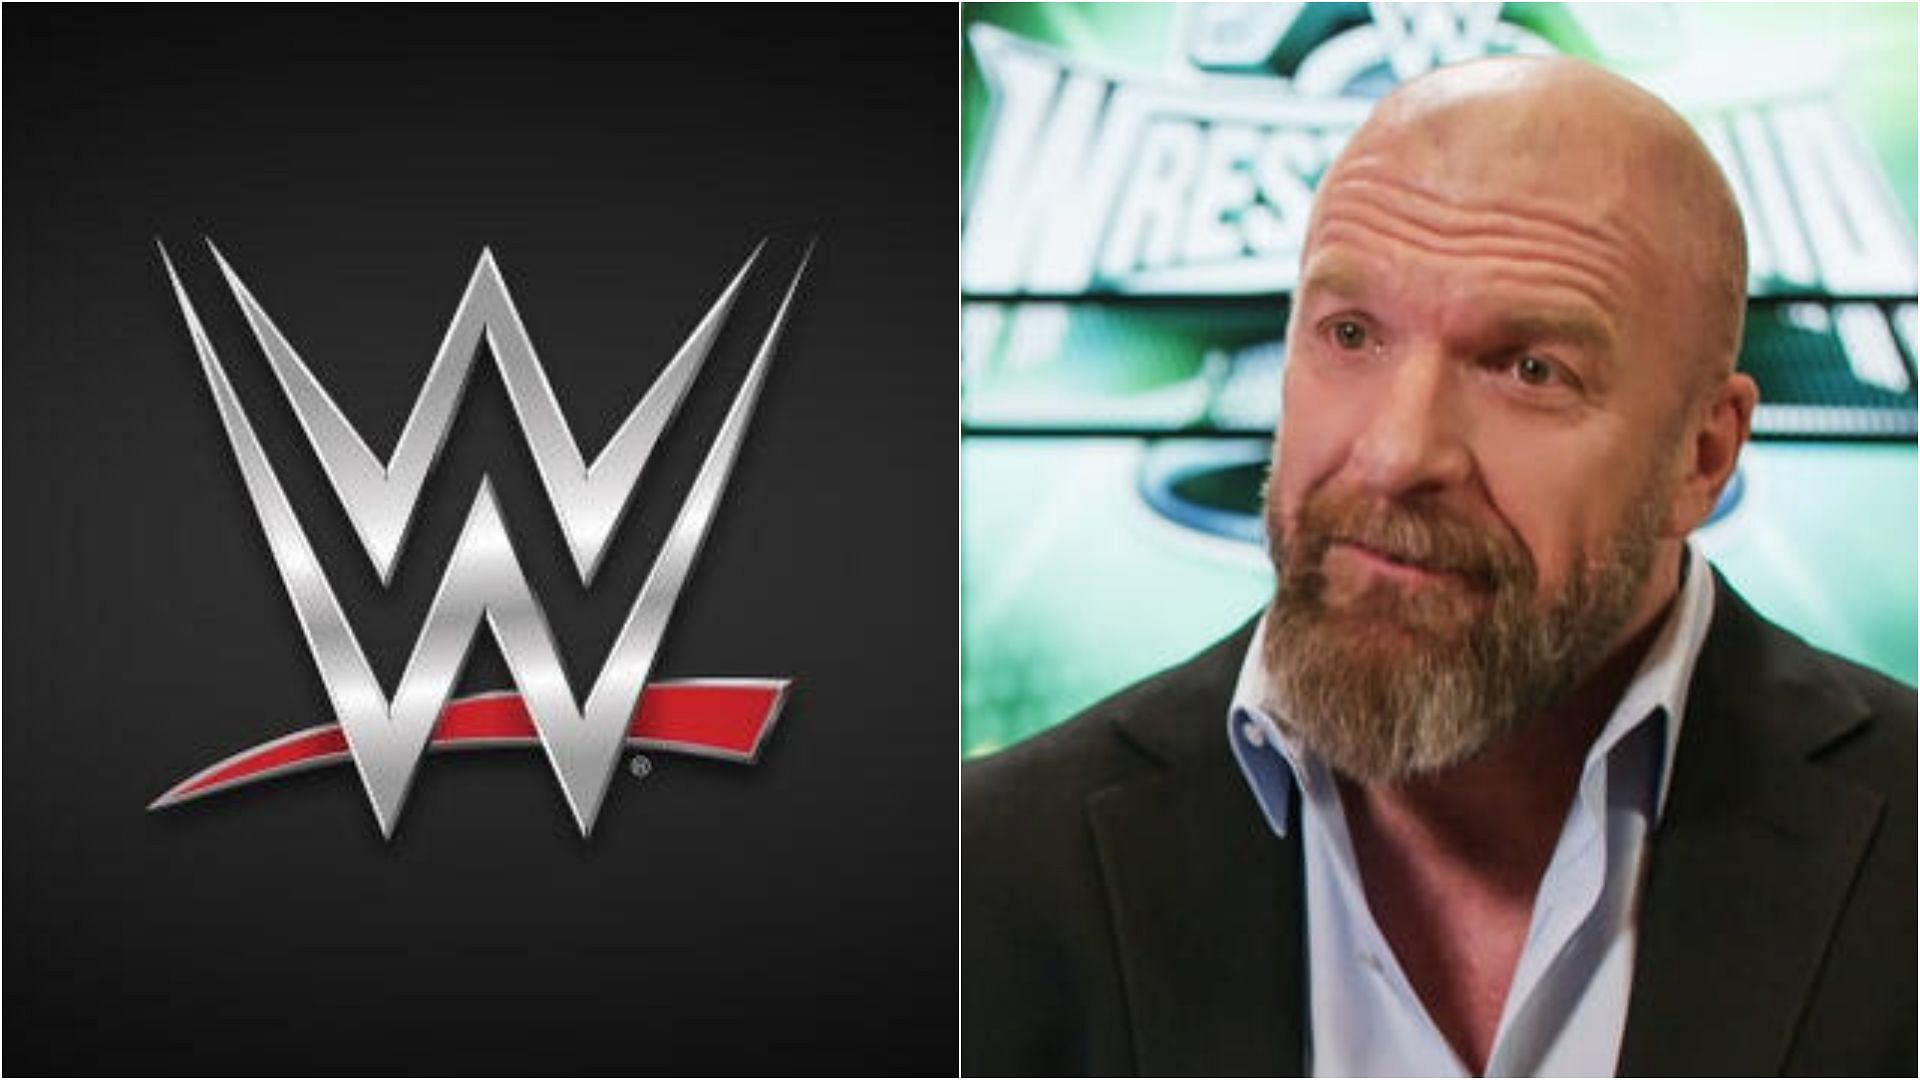 Triple H has brought back many big names since taking over WWE. (Images via WWE.com)